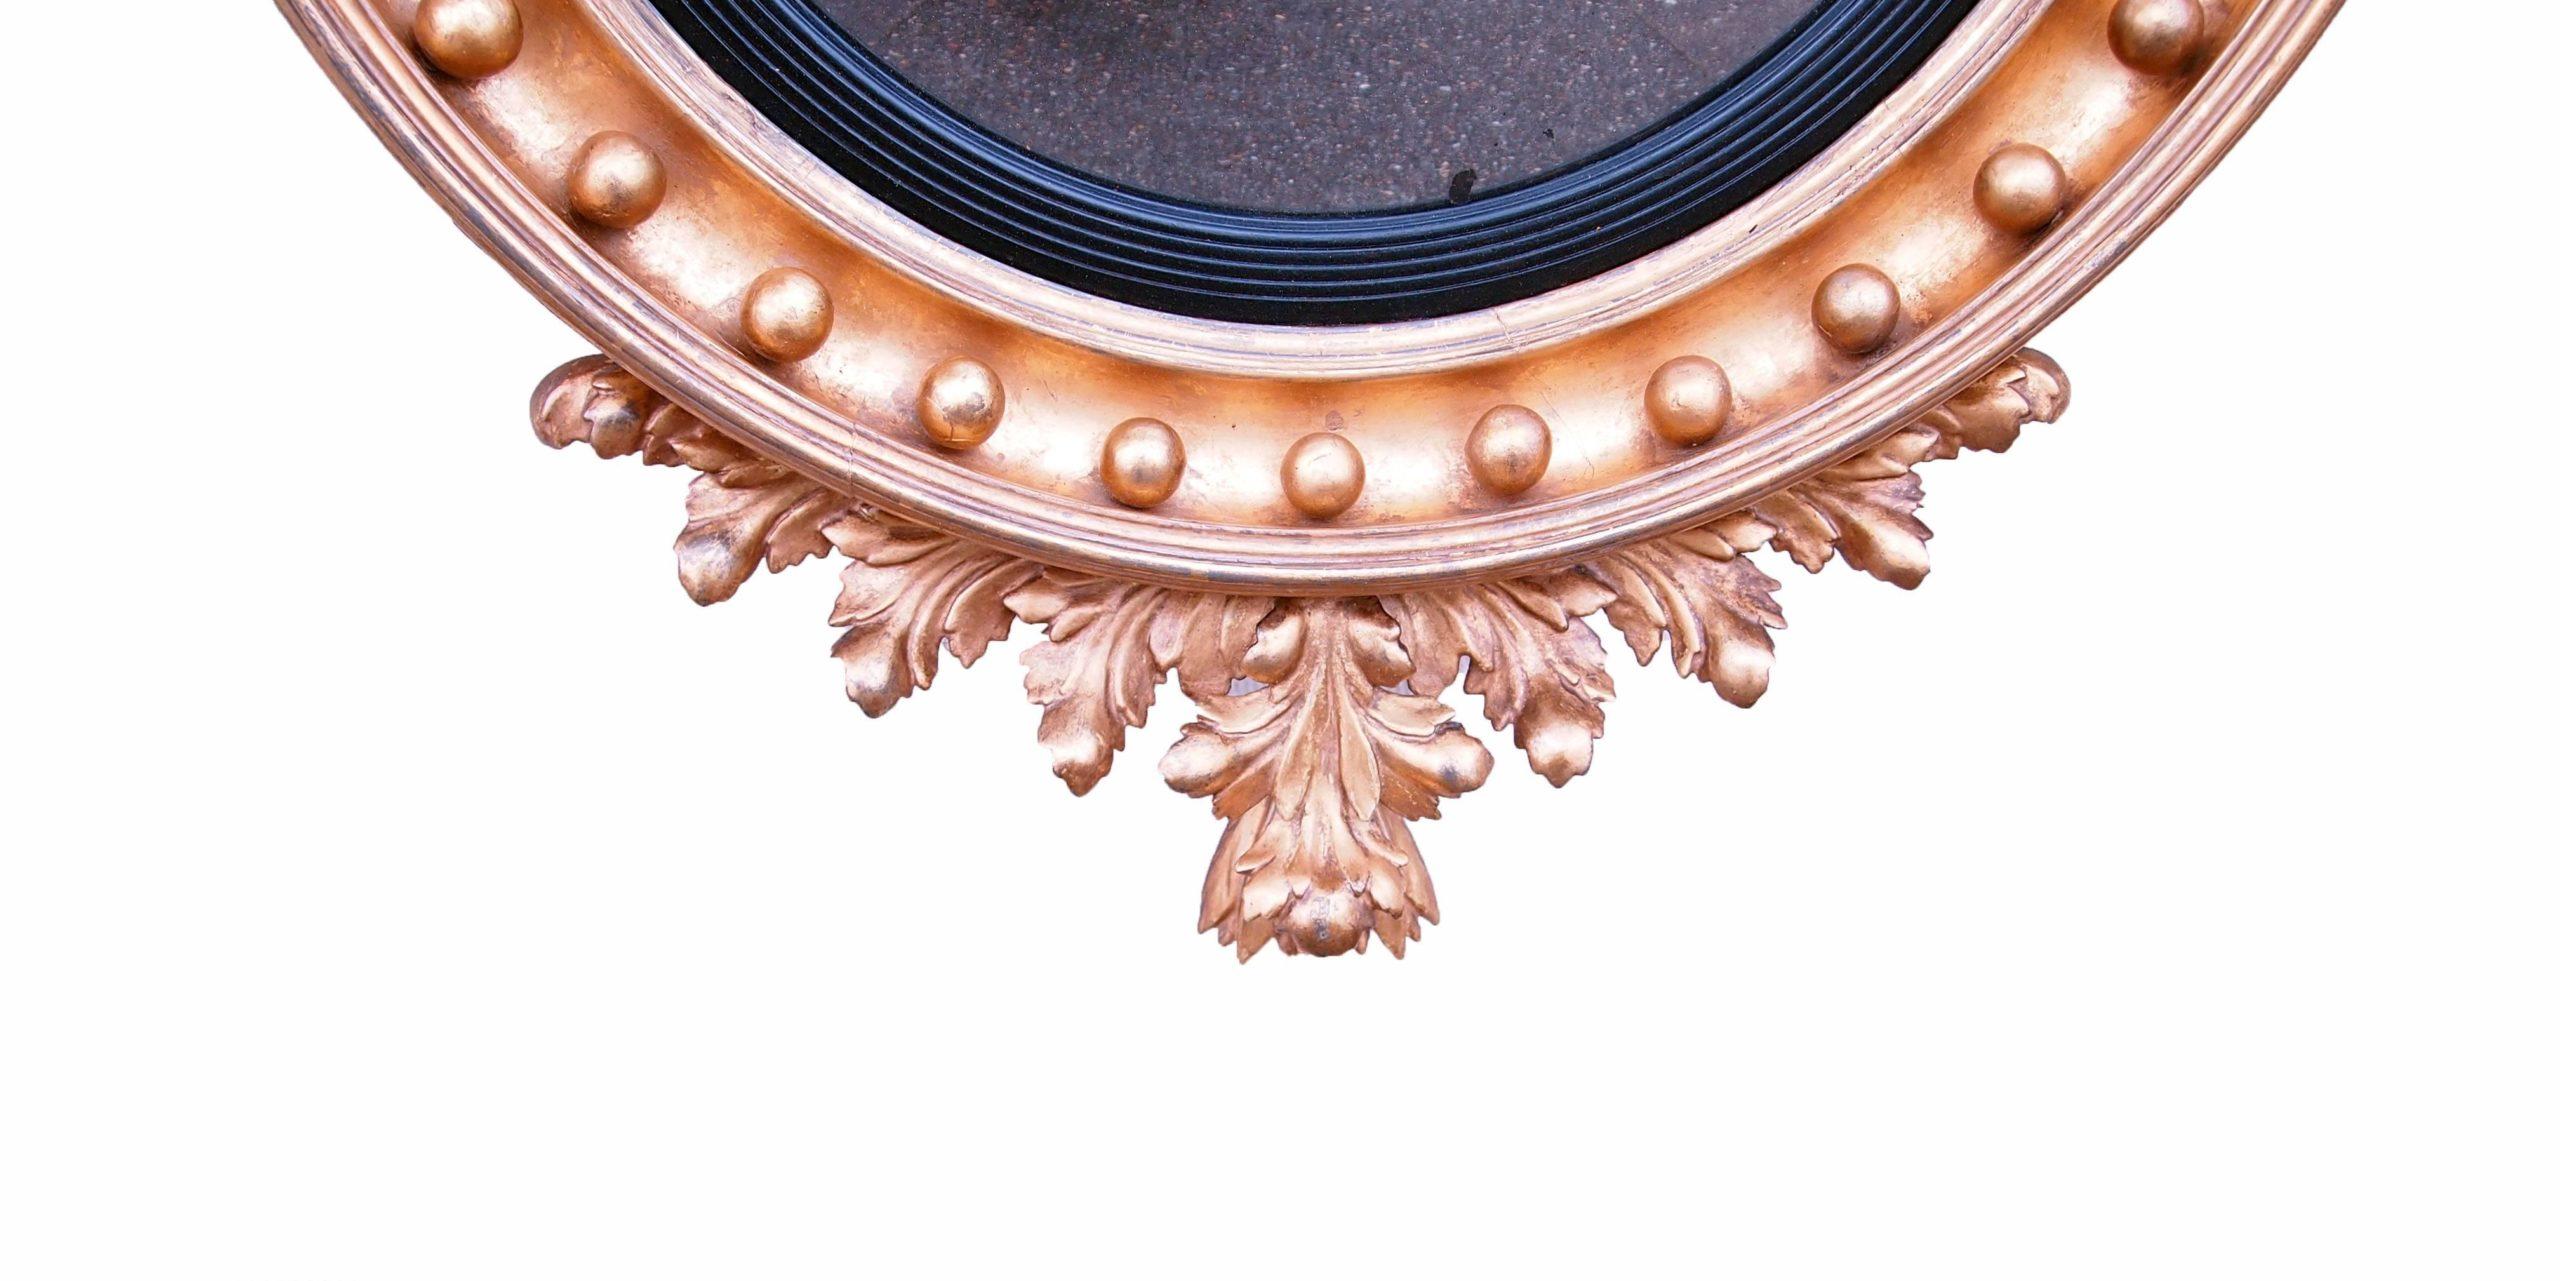 19th Century (Regency Period, 1820s) English giltwood convex mirror with unusual bold carved eagle surmounted to top and foliate carved decoration on bottom.
 